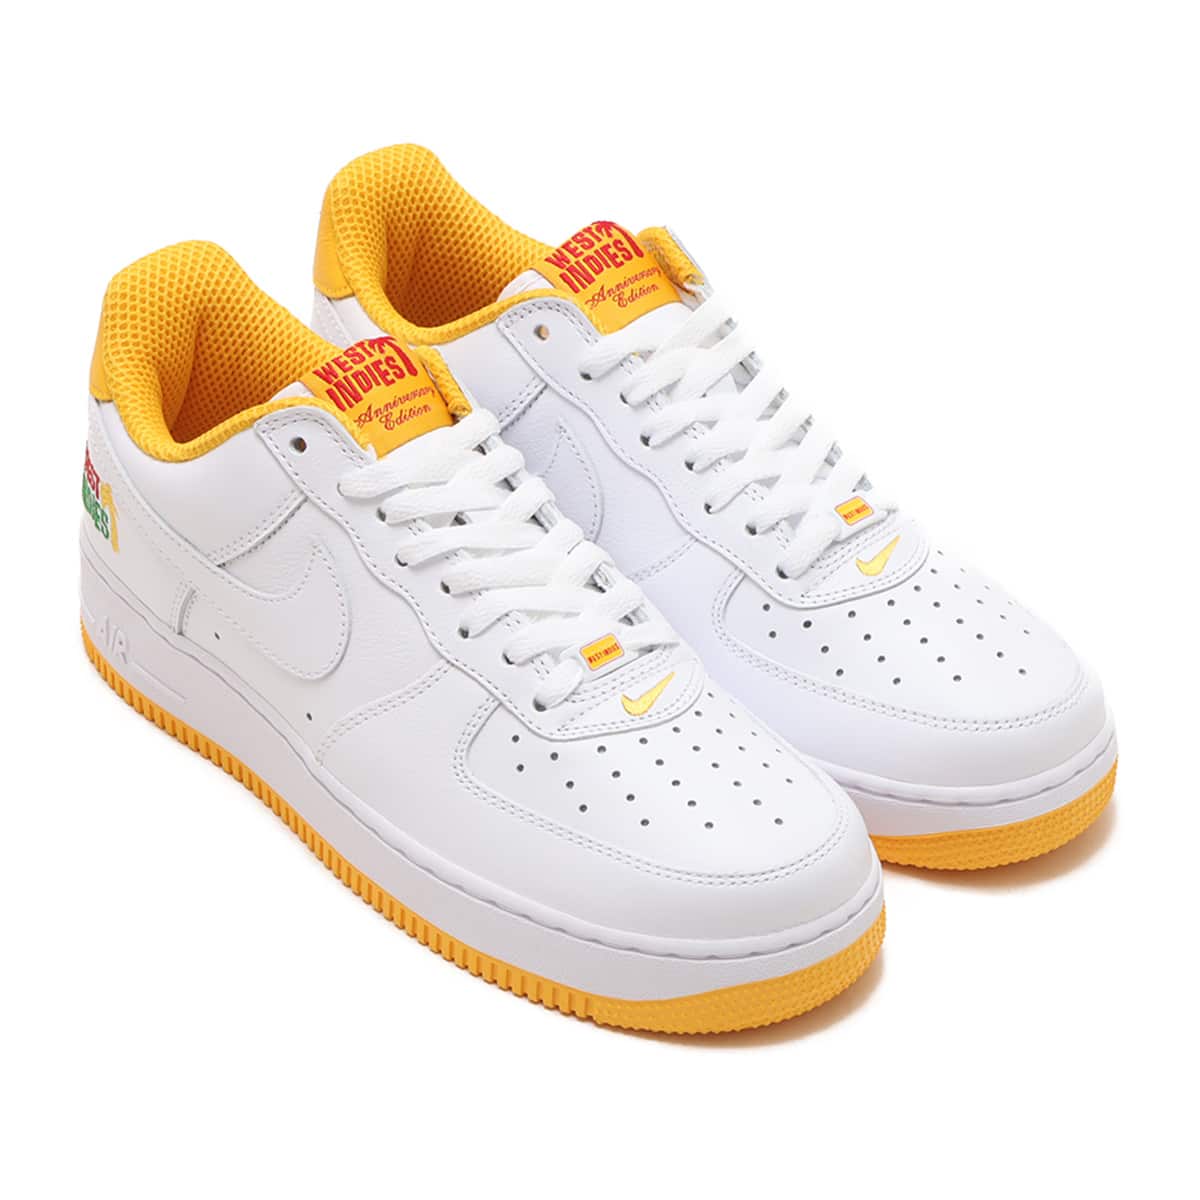 Nike Air Force 1 West Indies Yellow DX1156-101